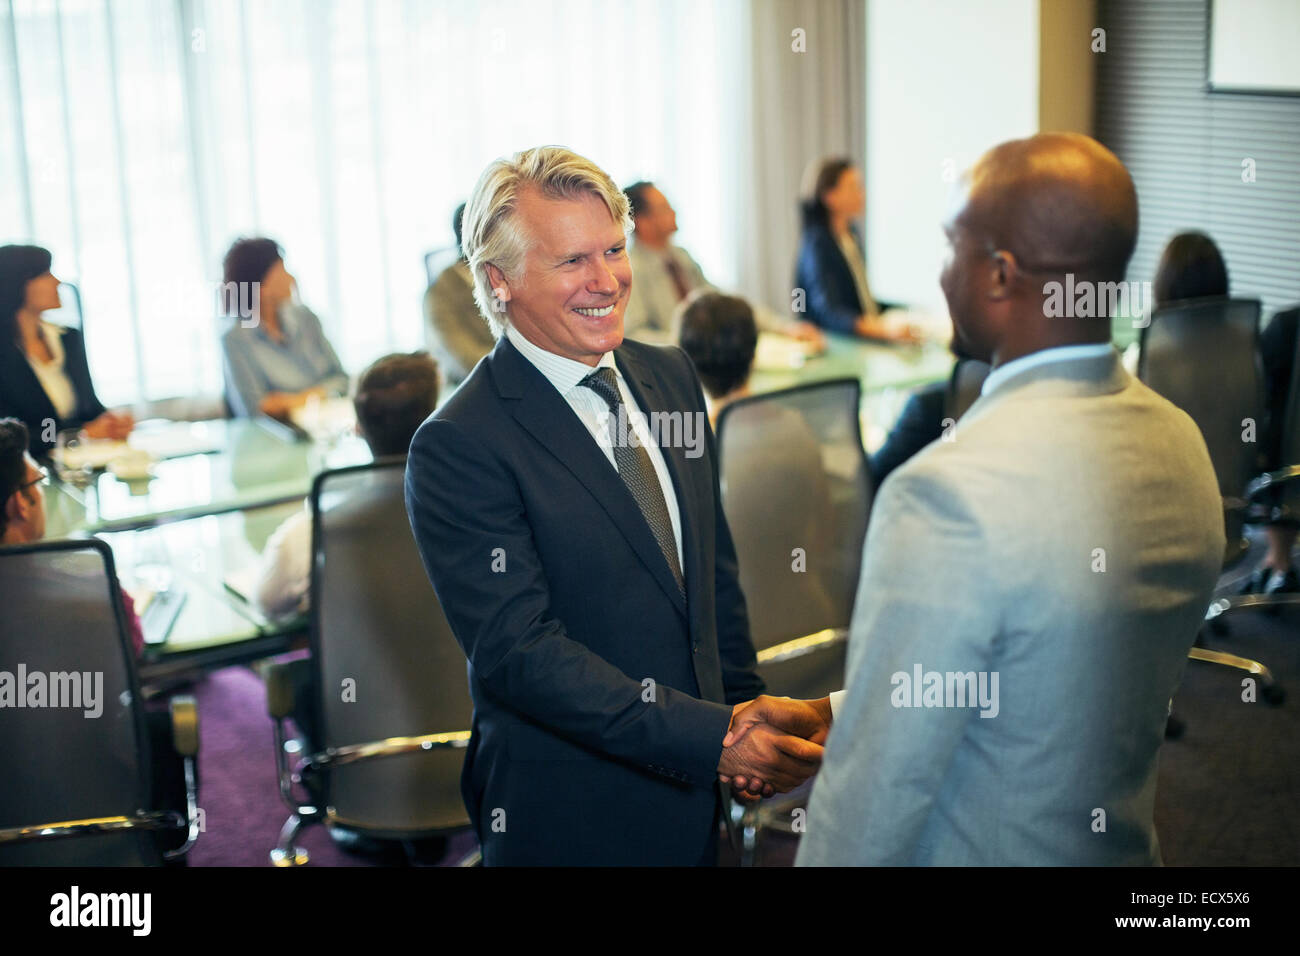 Smiling businessmen shaking hands during meeting in conference room Stock Photo